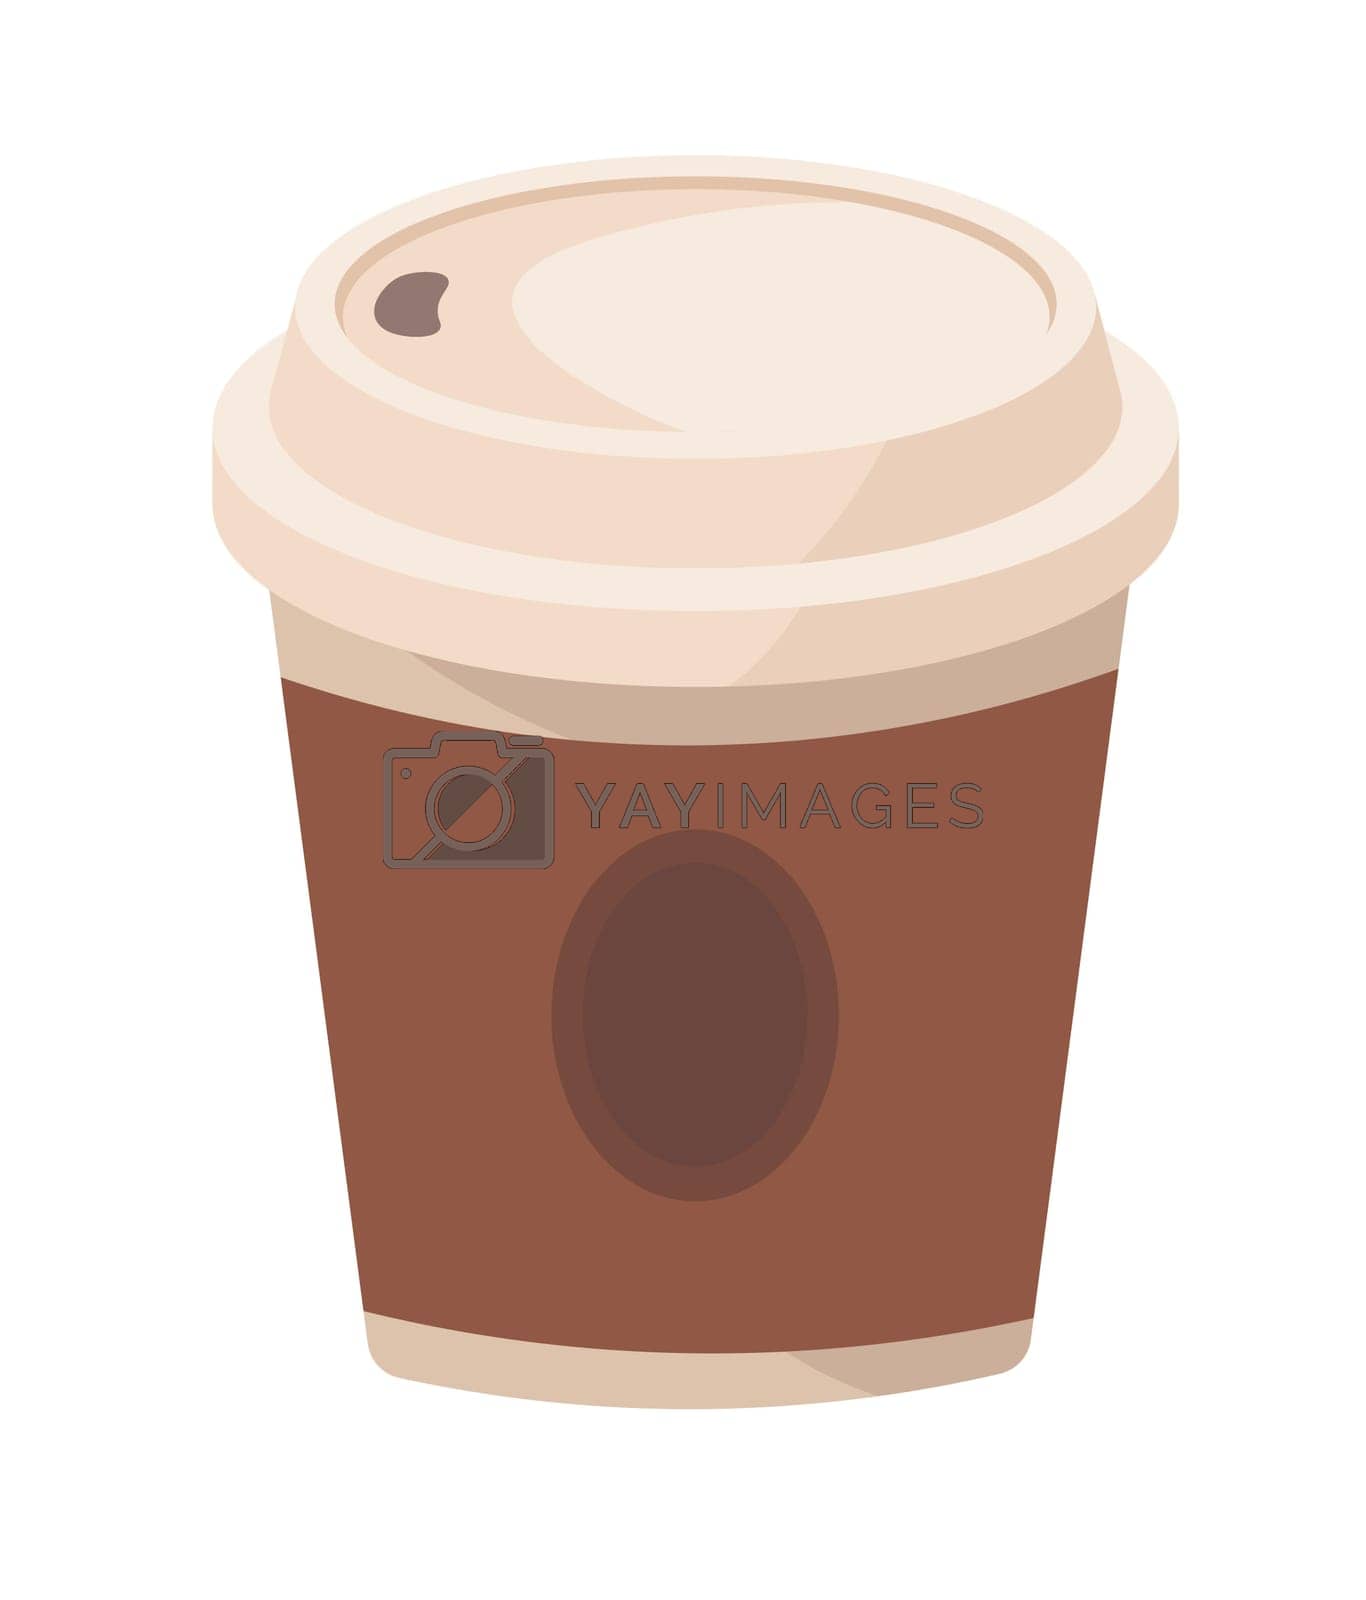 Royalty free image of Takeaway coffee cup with lid, coffee shop design by Sonulkaster